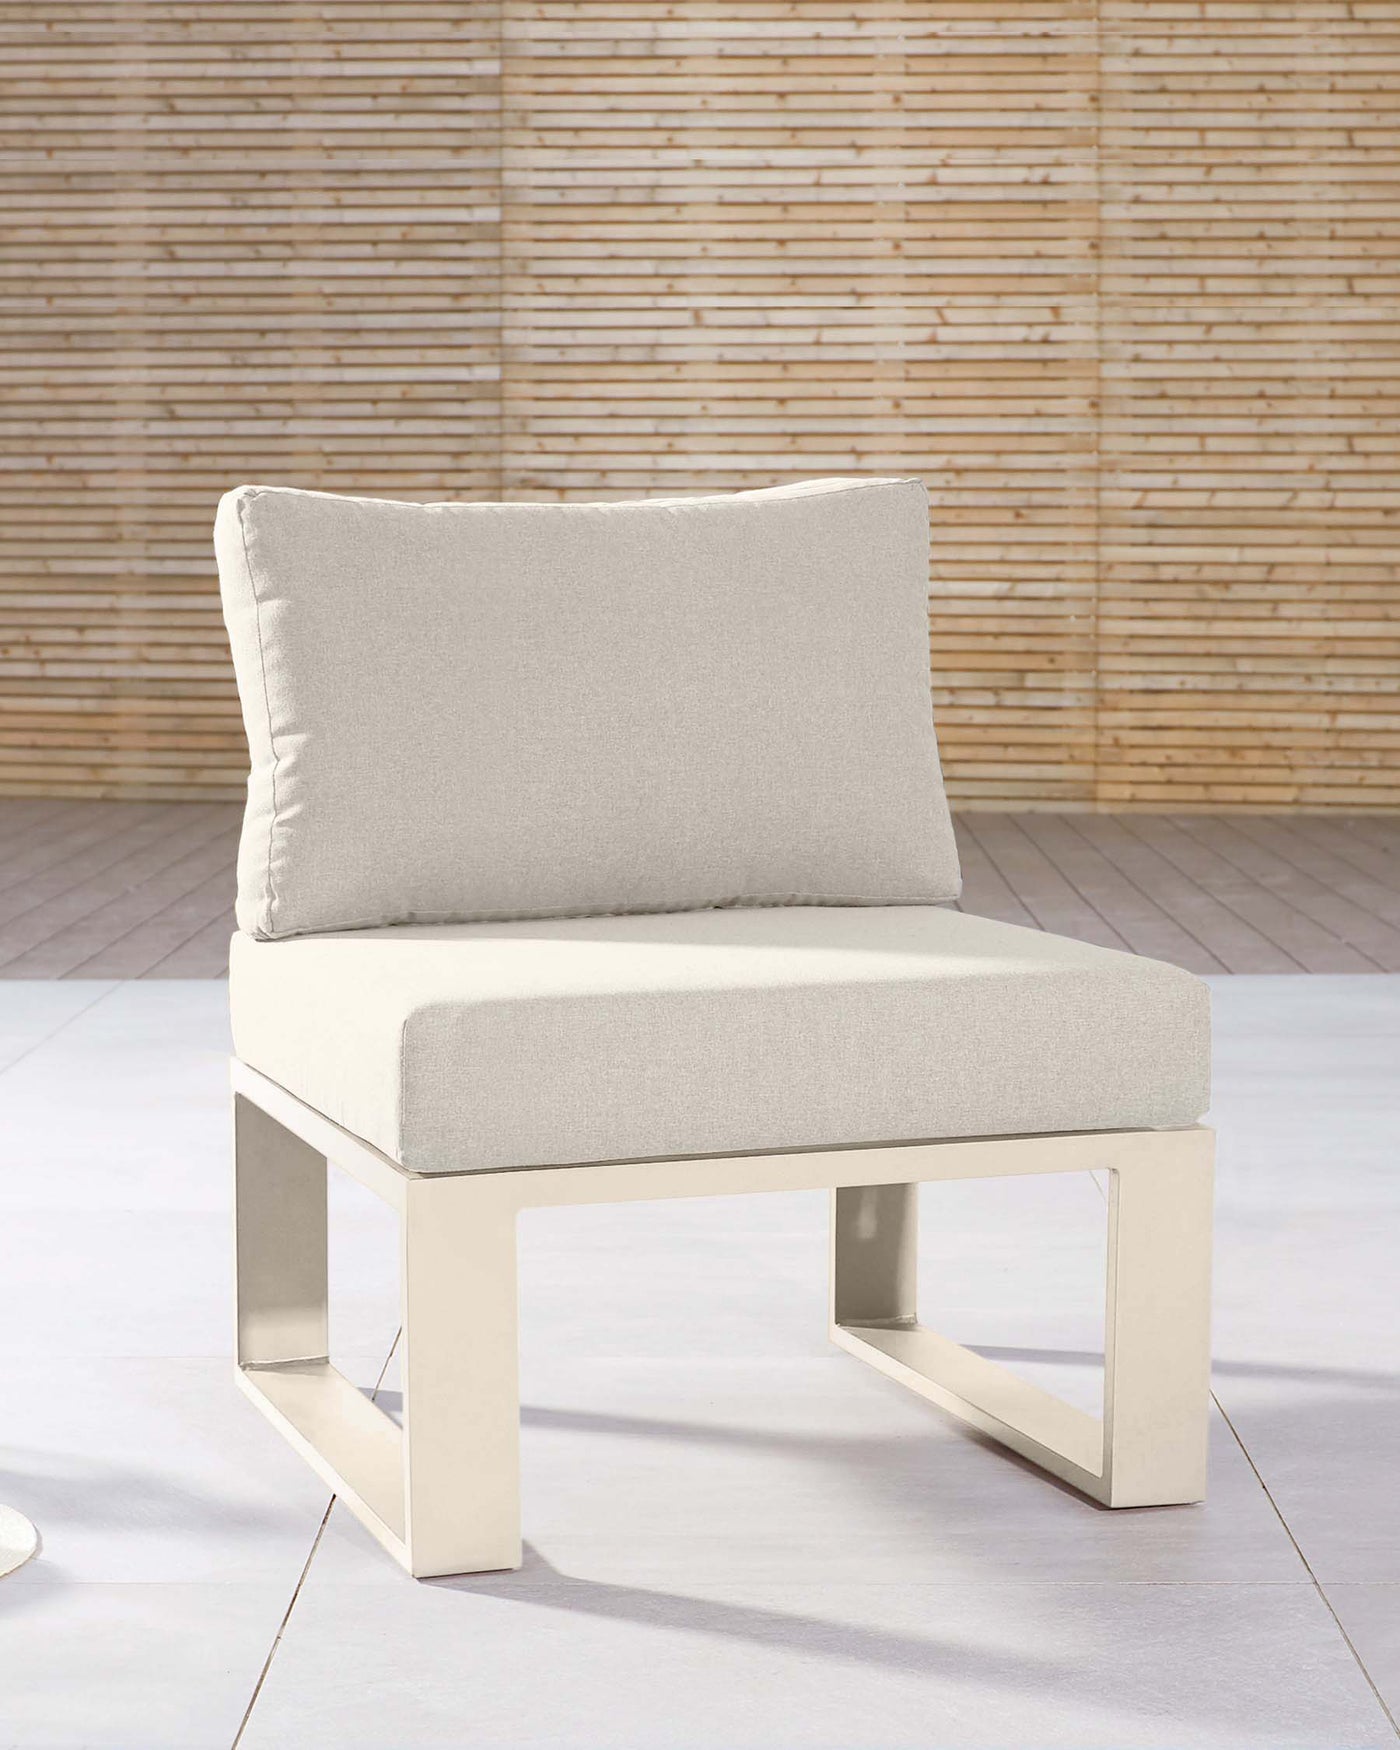 Modern minimalist armless chair with a beige upholstered cushion seat and backrest, featuring a sleek, cream-colored metallic base in a rectangular frame design. Set against a backdrop with a textured bamboo wall.